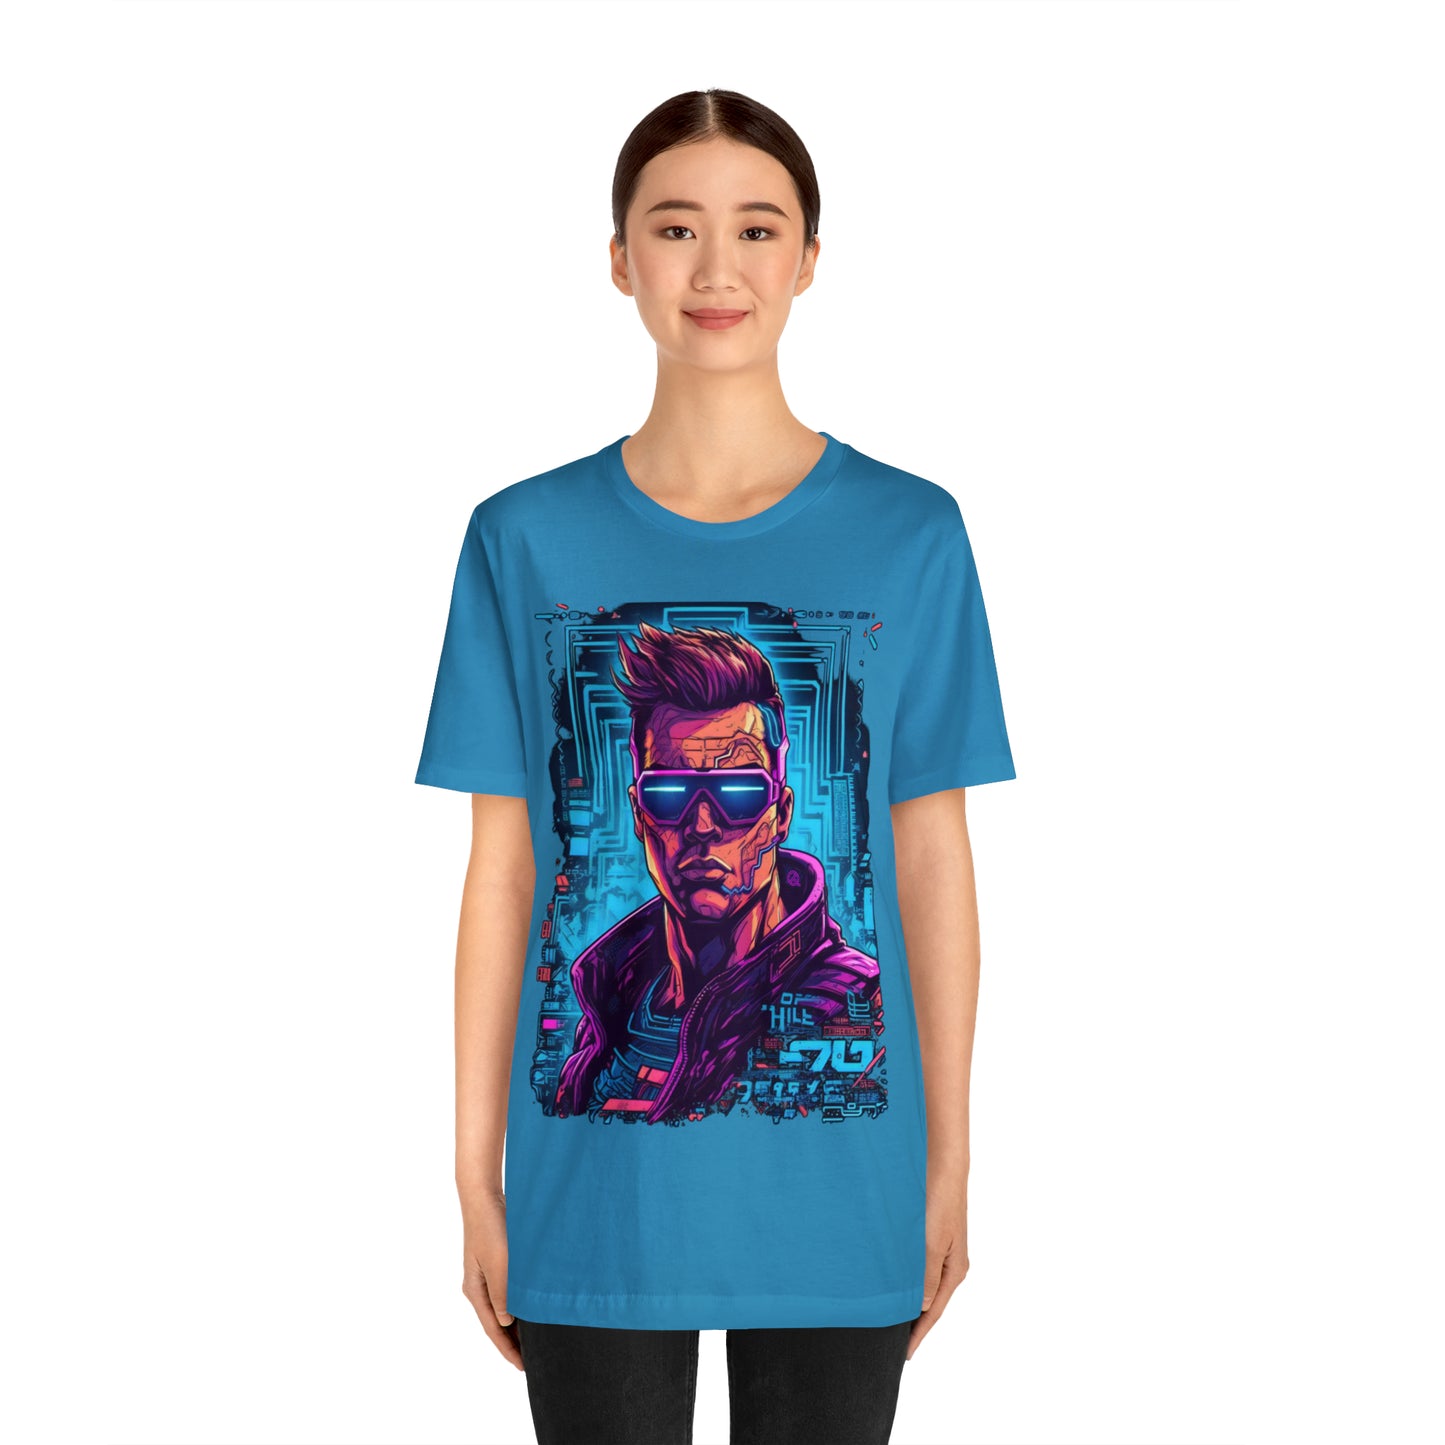 aqua-quest-thread-tee-shirt-with-large-neon-cyber-punk-on-center